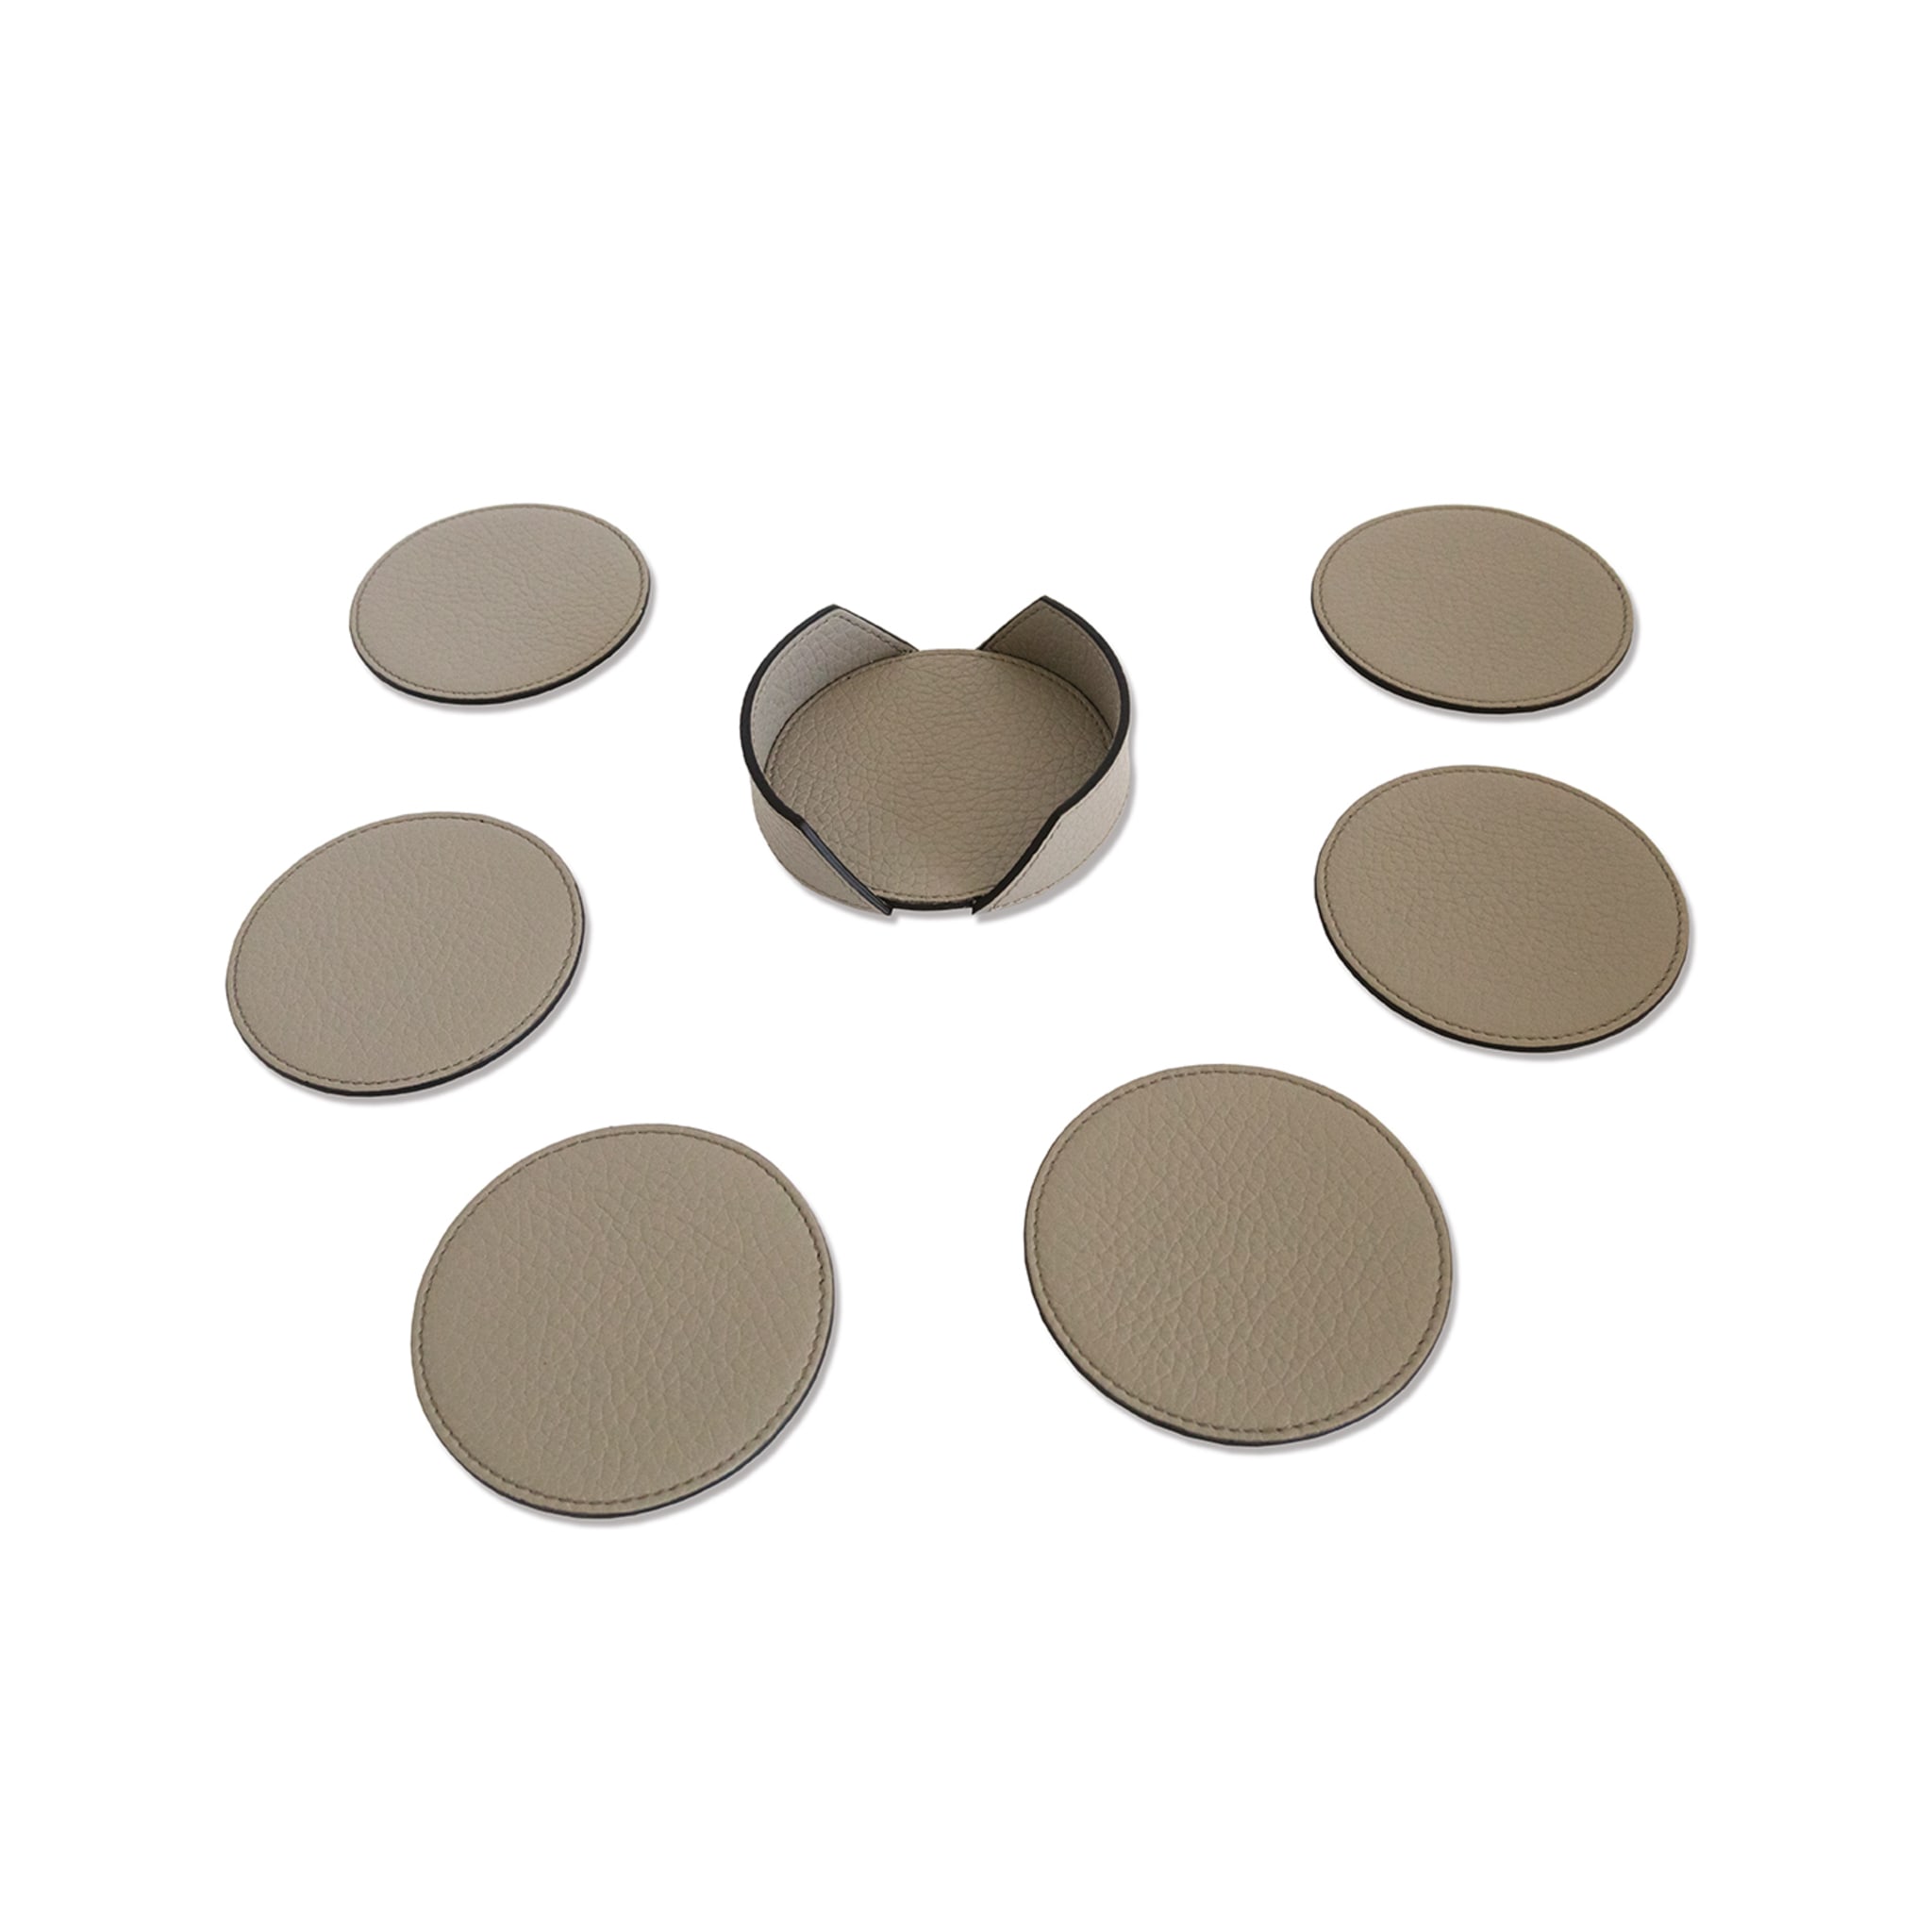 Wings Gray Set of 6 Coasters - Alternative view 3